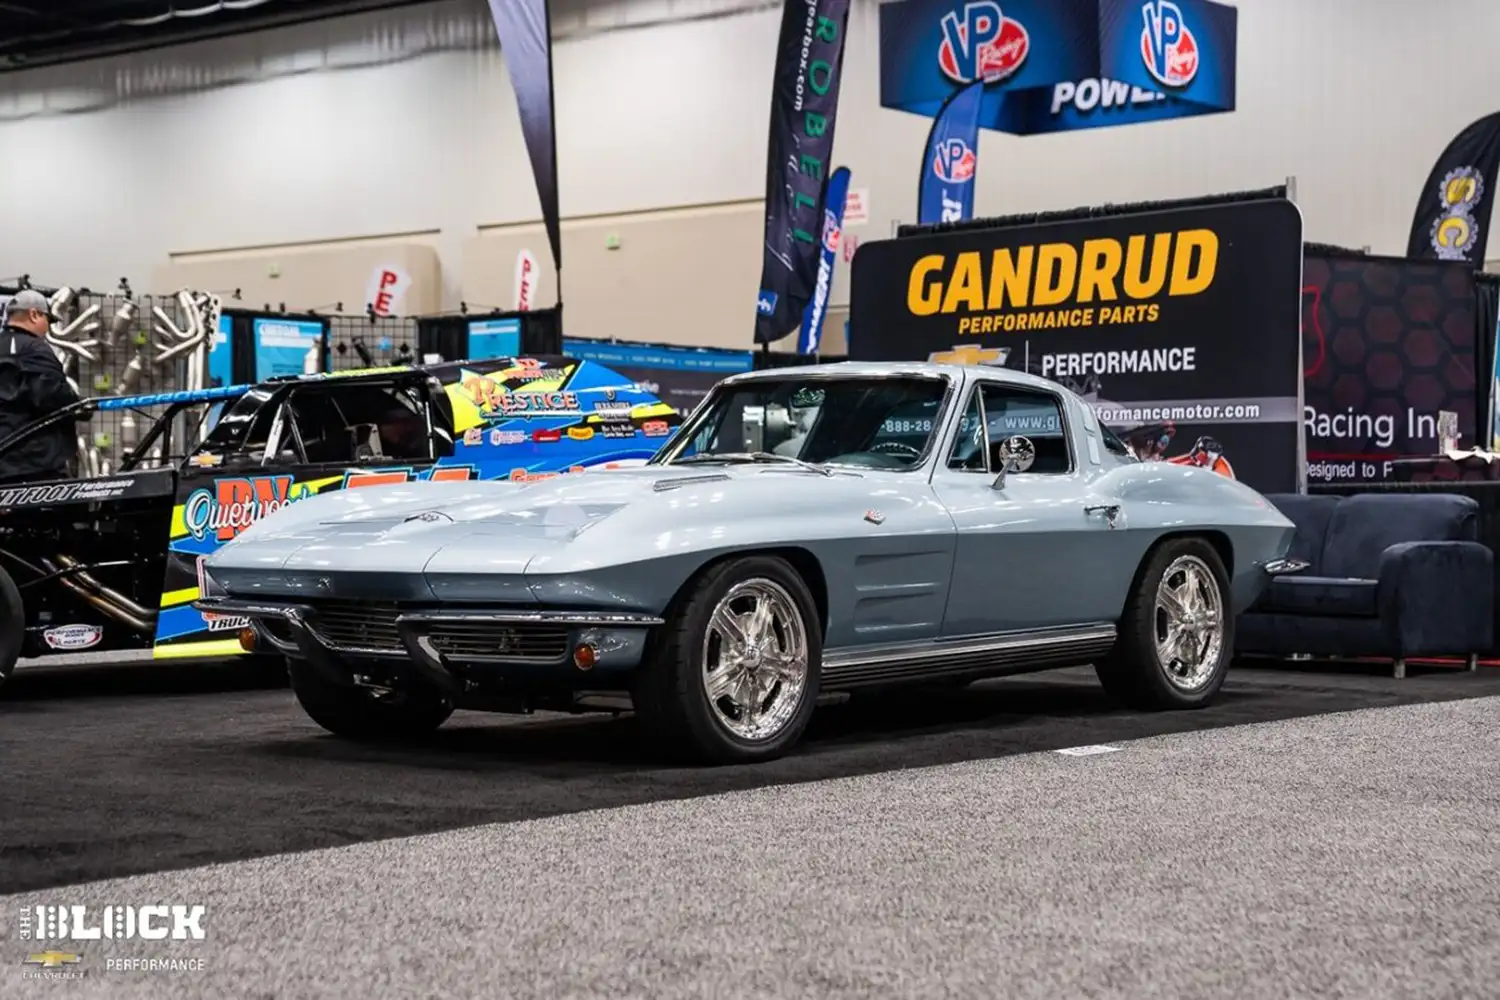 1964 Chevrolet Corvette Sting Ray by Moores Garage